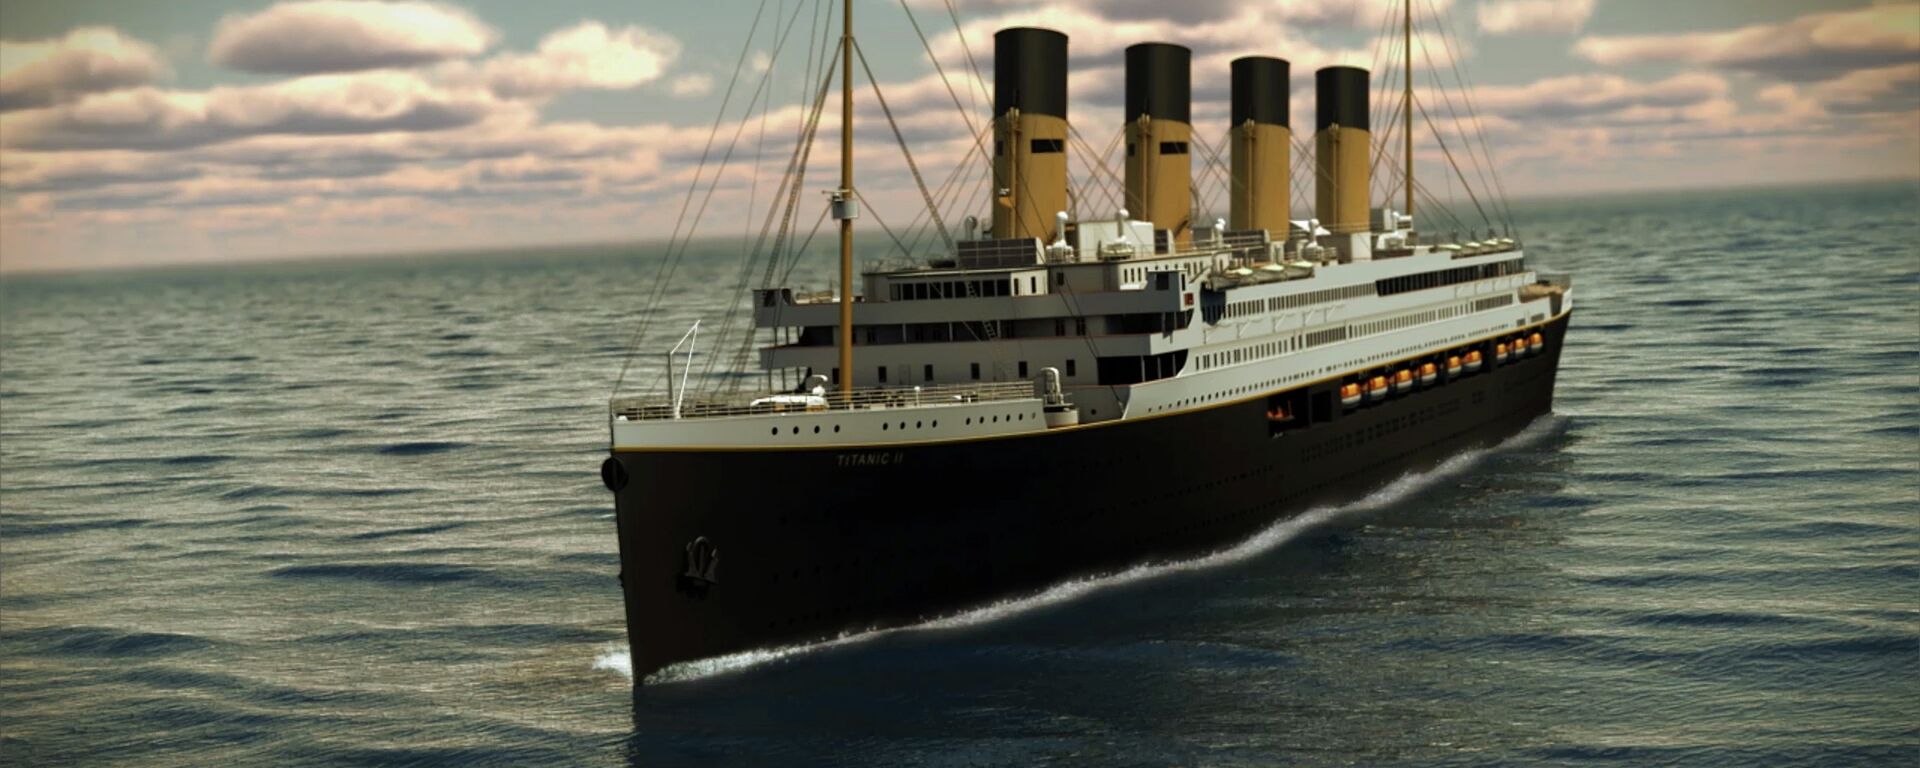 In this rendering provided by Blue Star Line, the Titanic II is shown cruising at sea. The ship, which Australian billionaire Clive Palmer is planning to build in China, is scheduled to sail in 2016 - سبوتنيك عربي, 1920, 21.06.2023